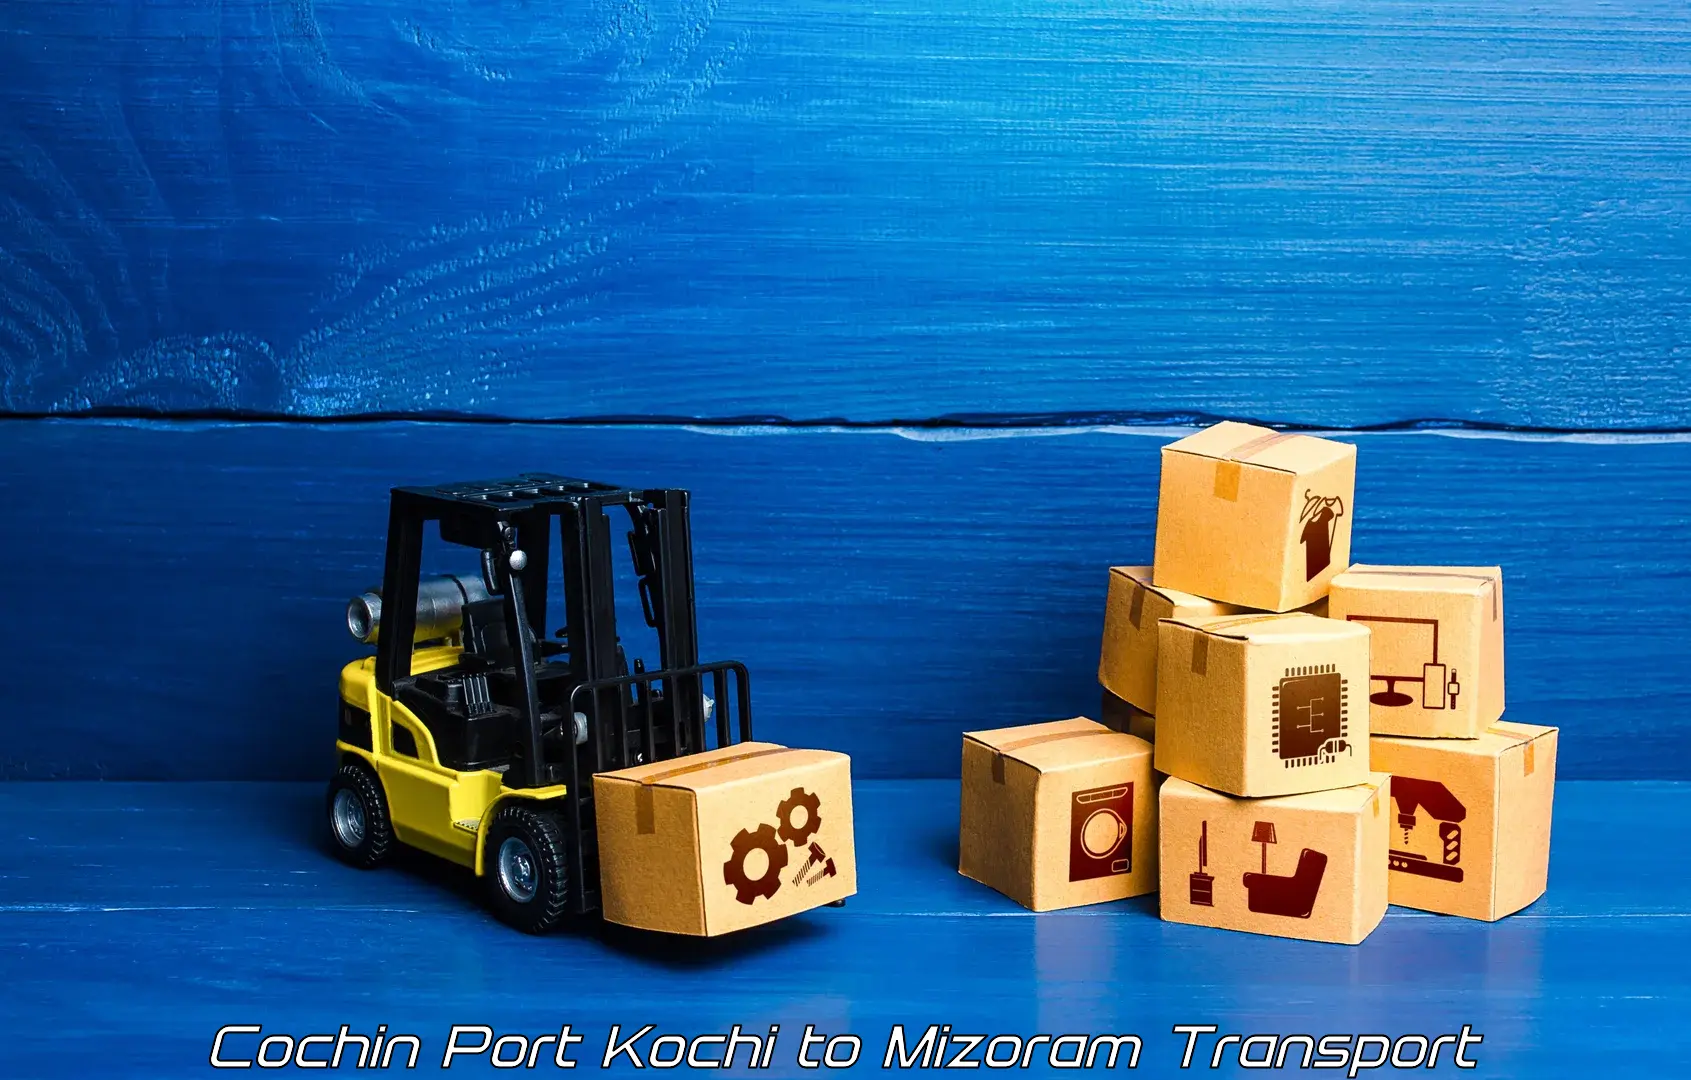 Package delivery services in Cochin Port Kochi to Aizawl